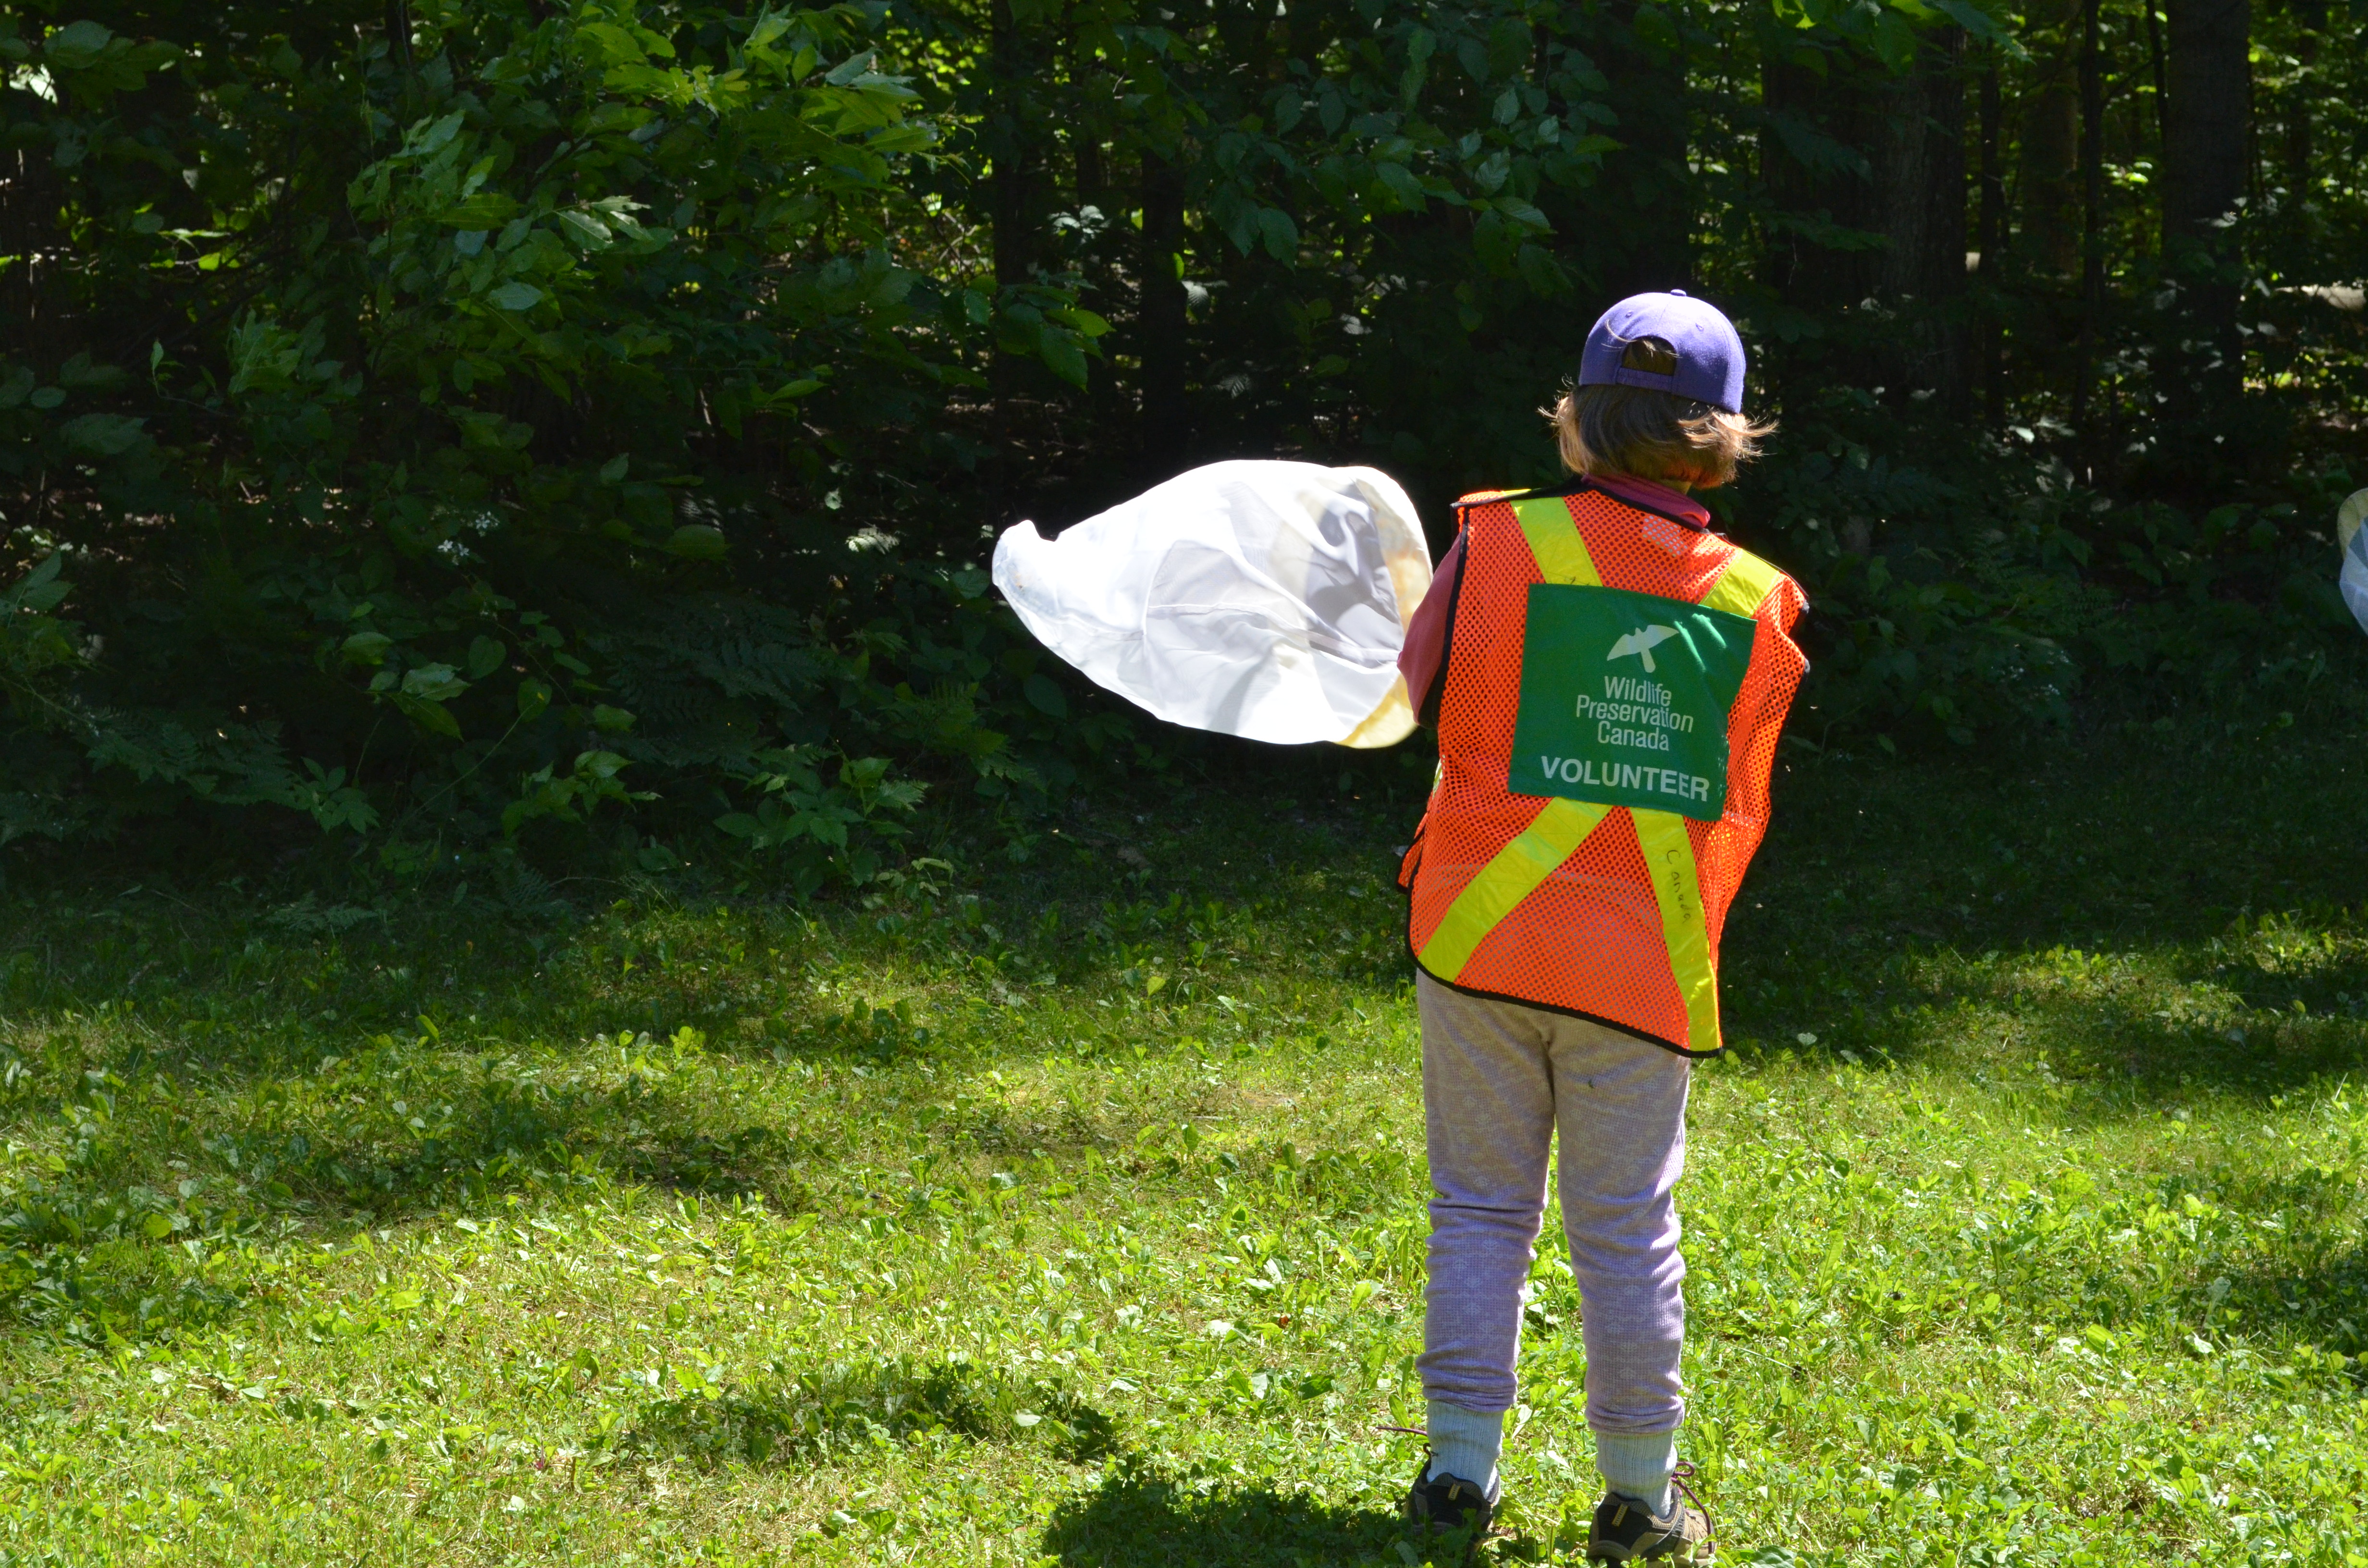 A kid with an orange reflective vest with a large green patch on the back that says Volunteer - Wildlife Preservation Canada swings a net to catch a bumble bee in a grassy area surrounded by trees.